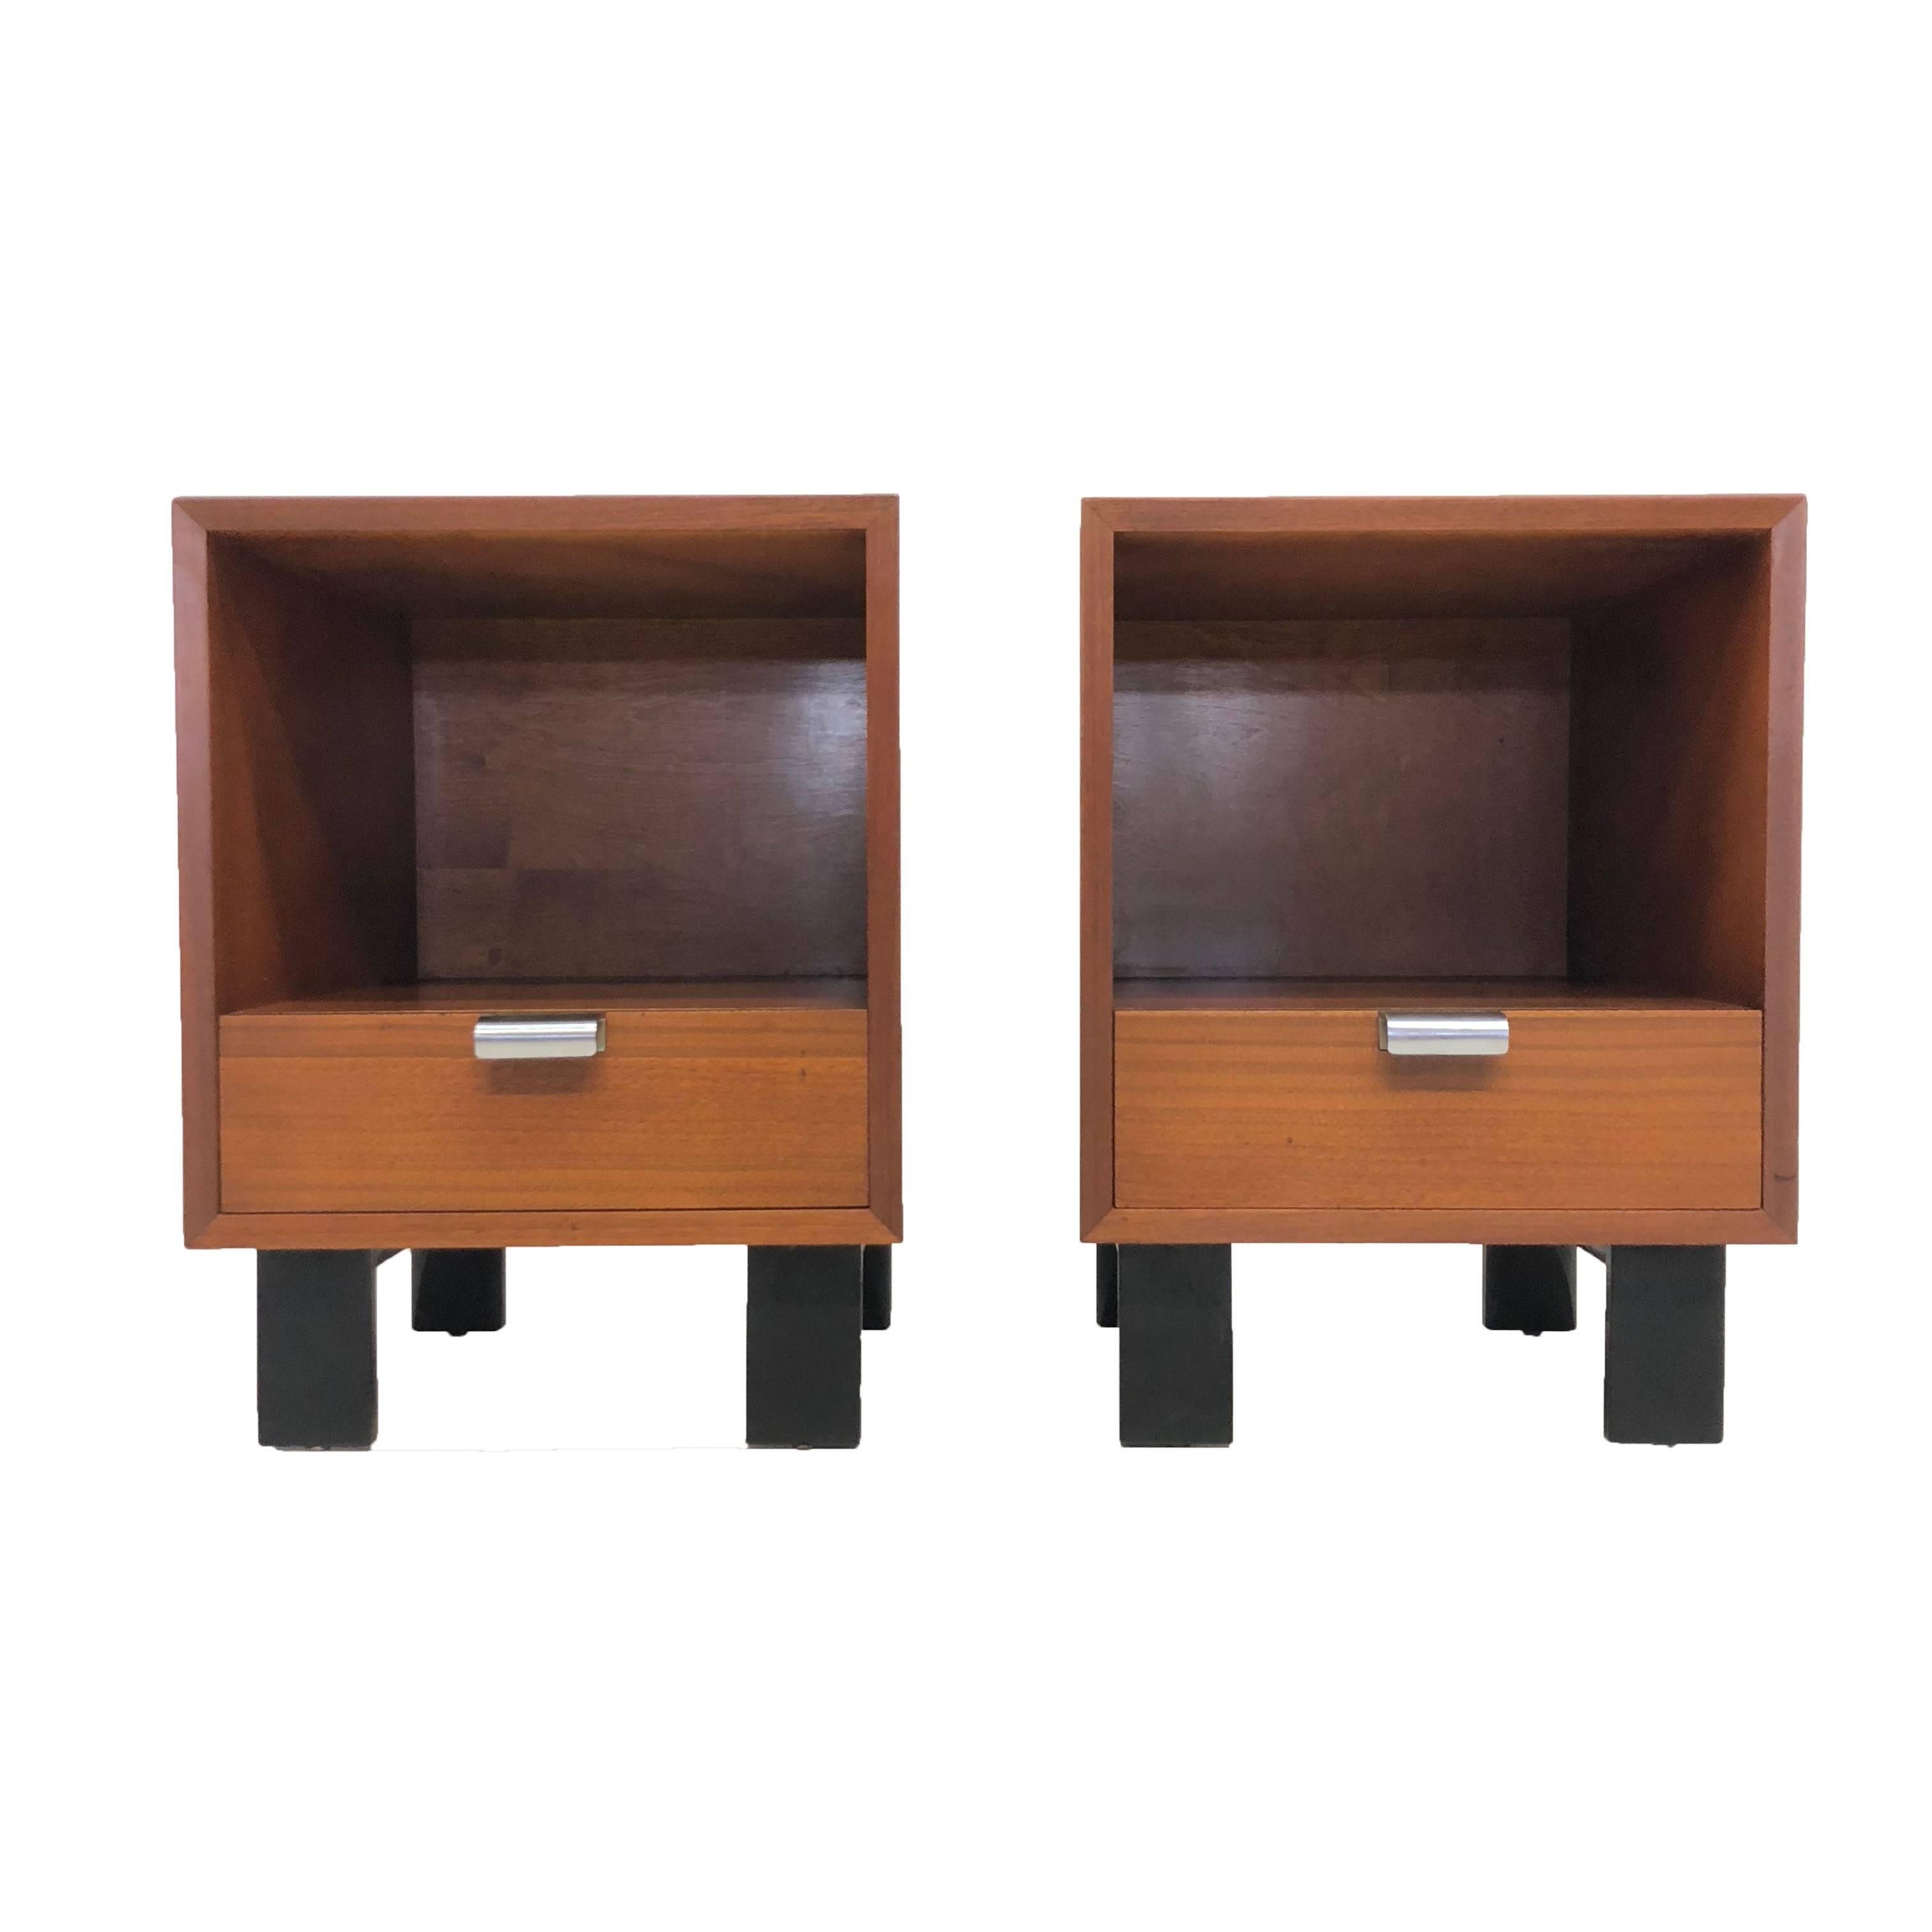 Pair of midcentury George Nelson for Herman Miller side tables, part of the Basic Storage Components that George Nelson designed for Herman Miller in 1952. Table tops have some losses and age appropriate wear as seen in photos.

May be purchased